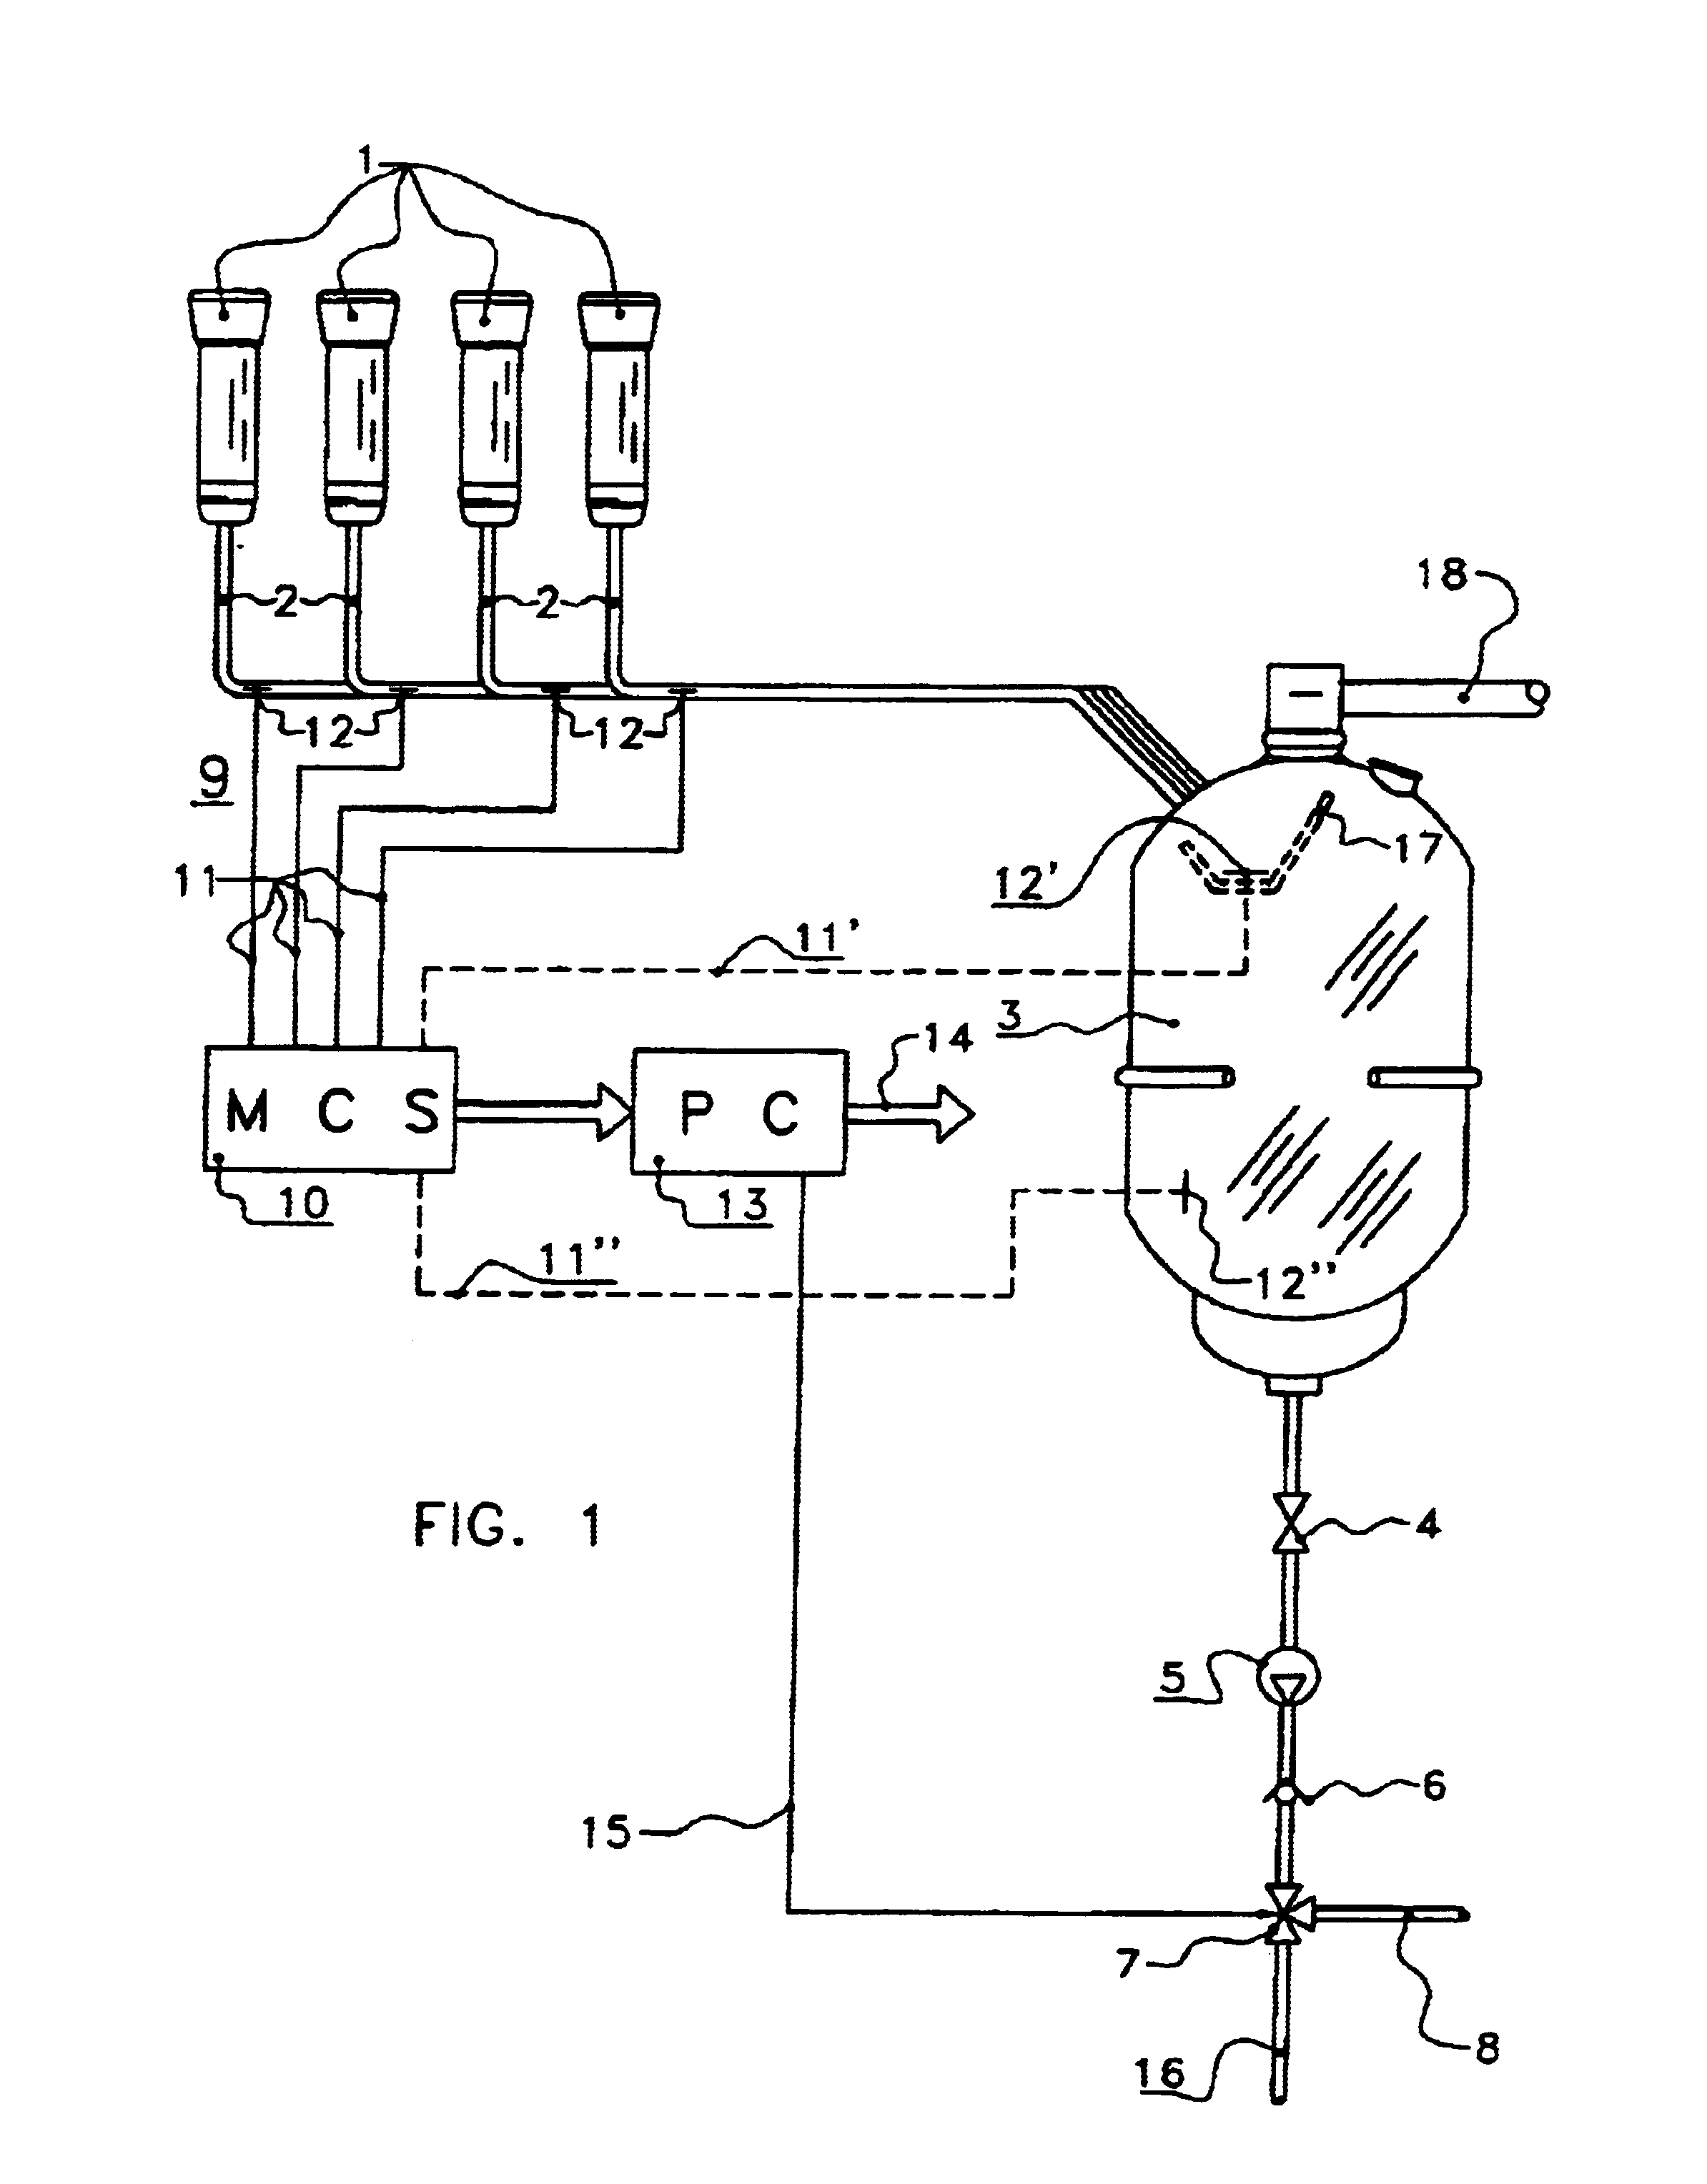 Device and method for separating milk from dairy animals